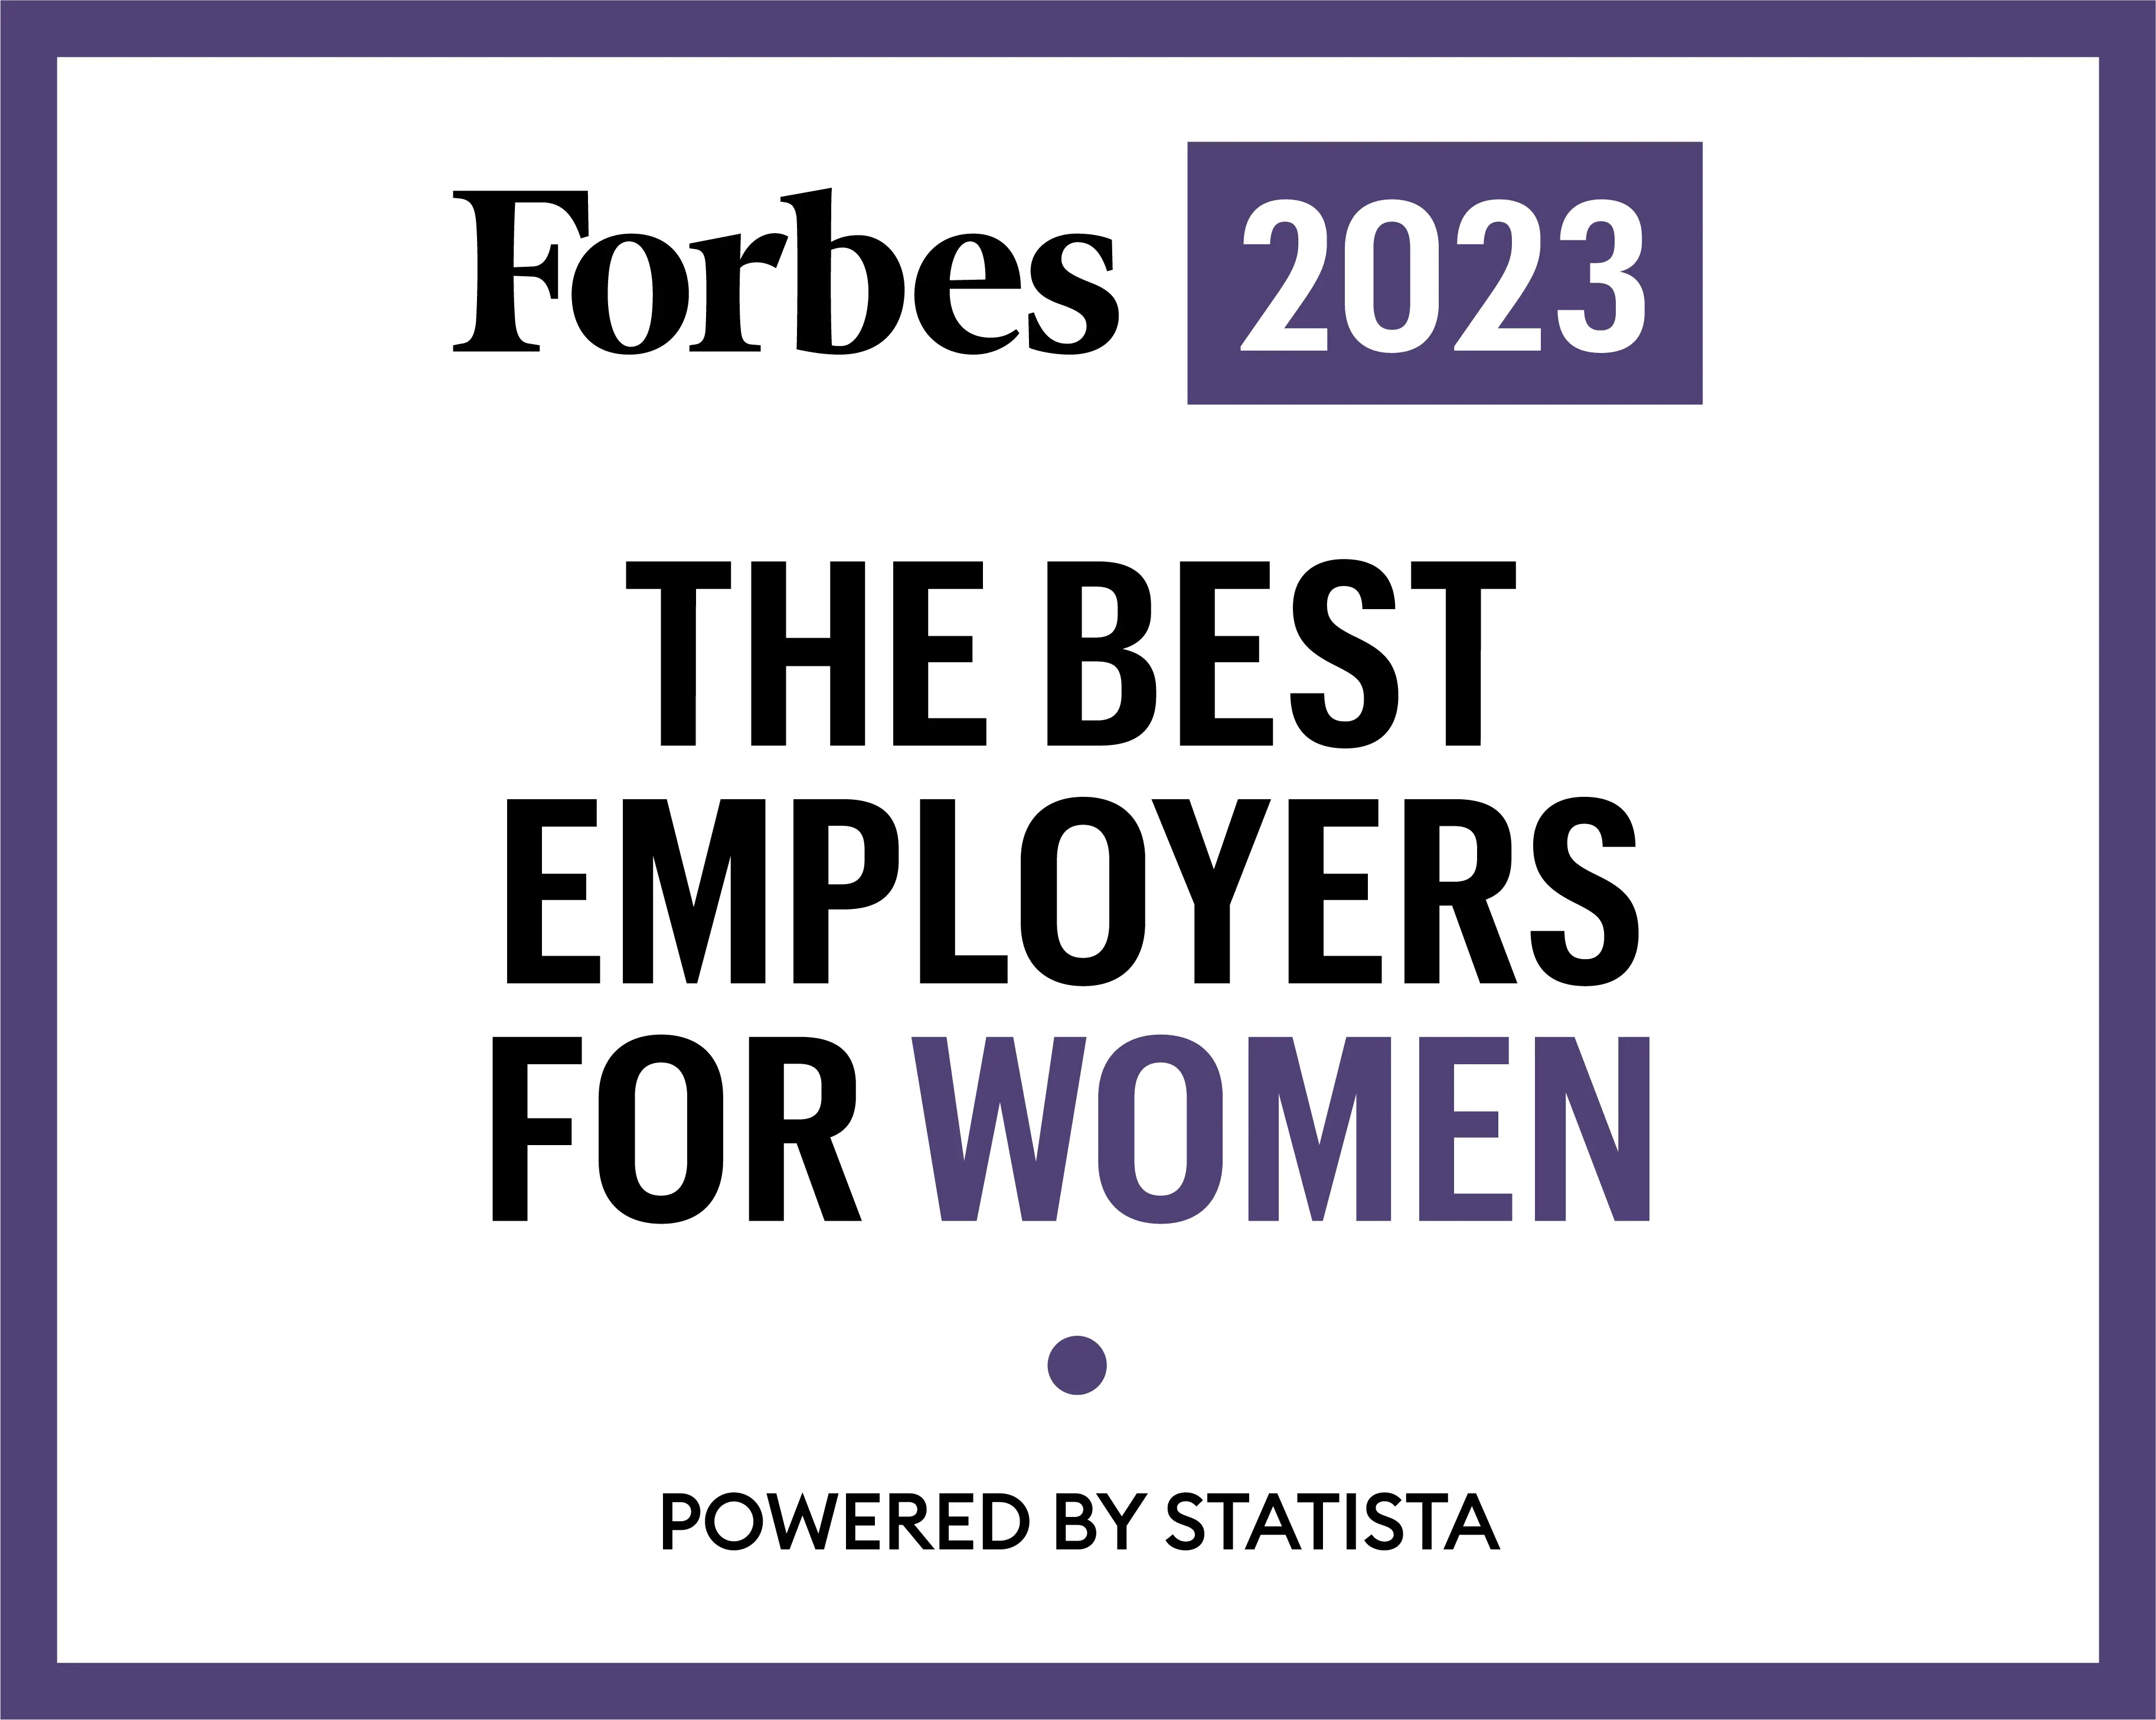 Forbes 2023 THE BEST EMPLOYERS FOR WOMEN